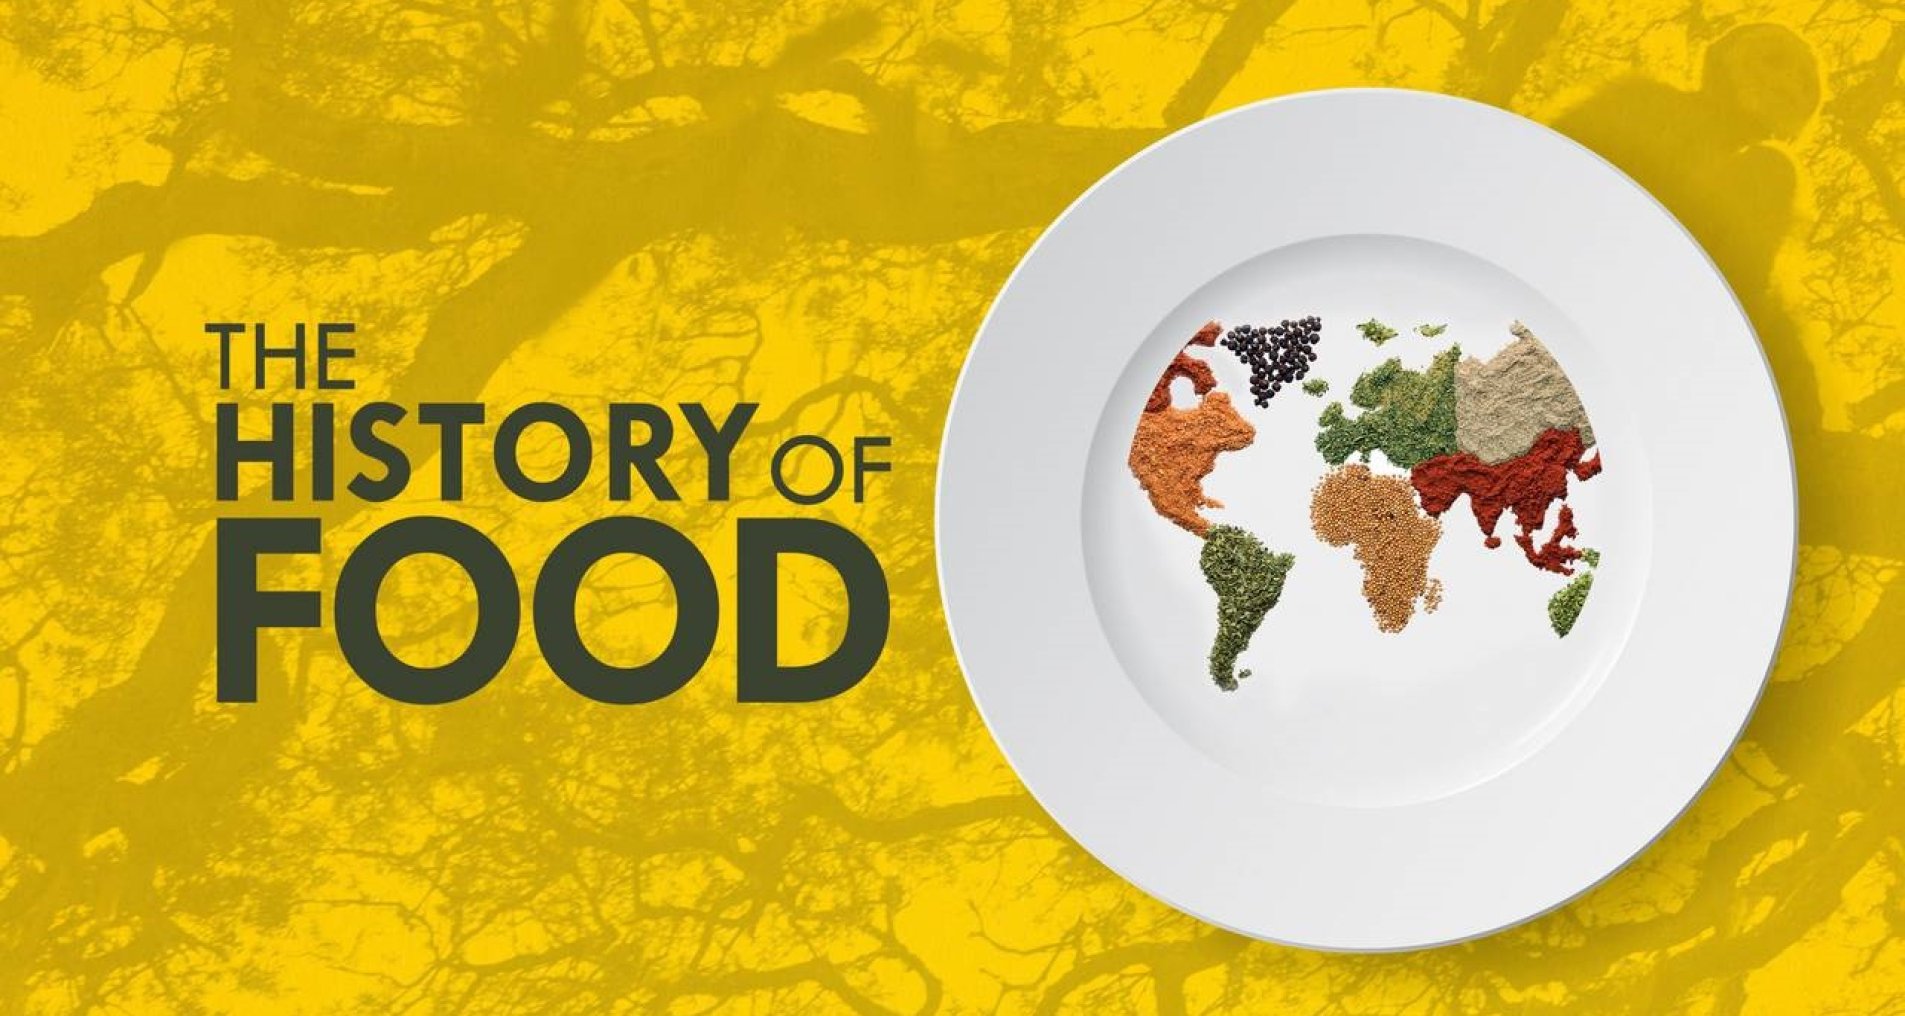 The History of Food Фото: https://www.hbomax.com